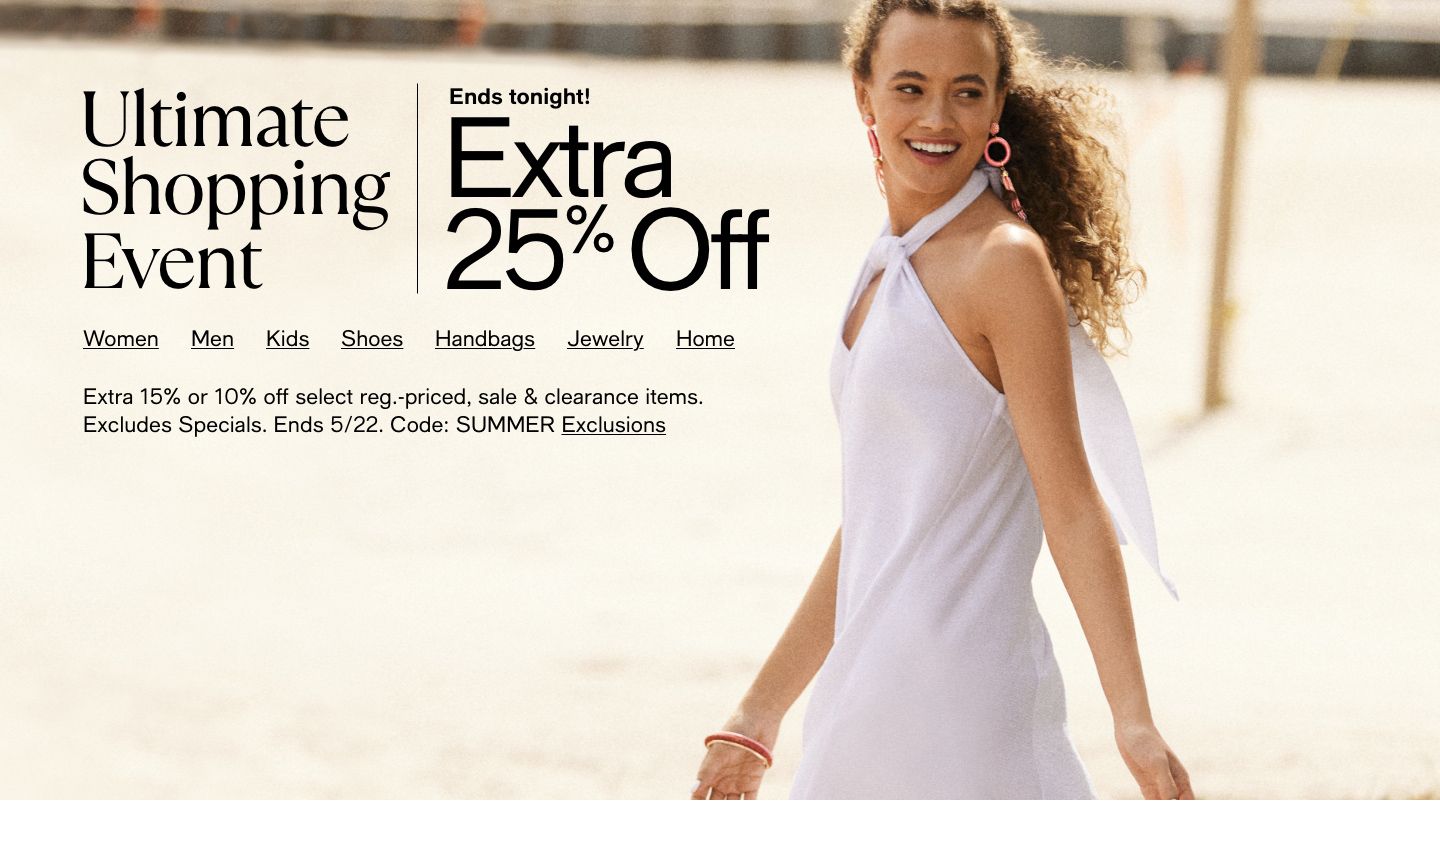 Ultimate Shopping Event. Ends tonight! Extra 25 percent off. Ends 5/22. Code: SUMMER. Exclusions